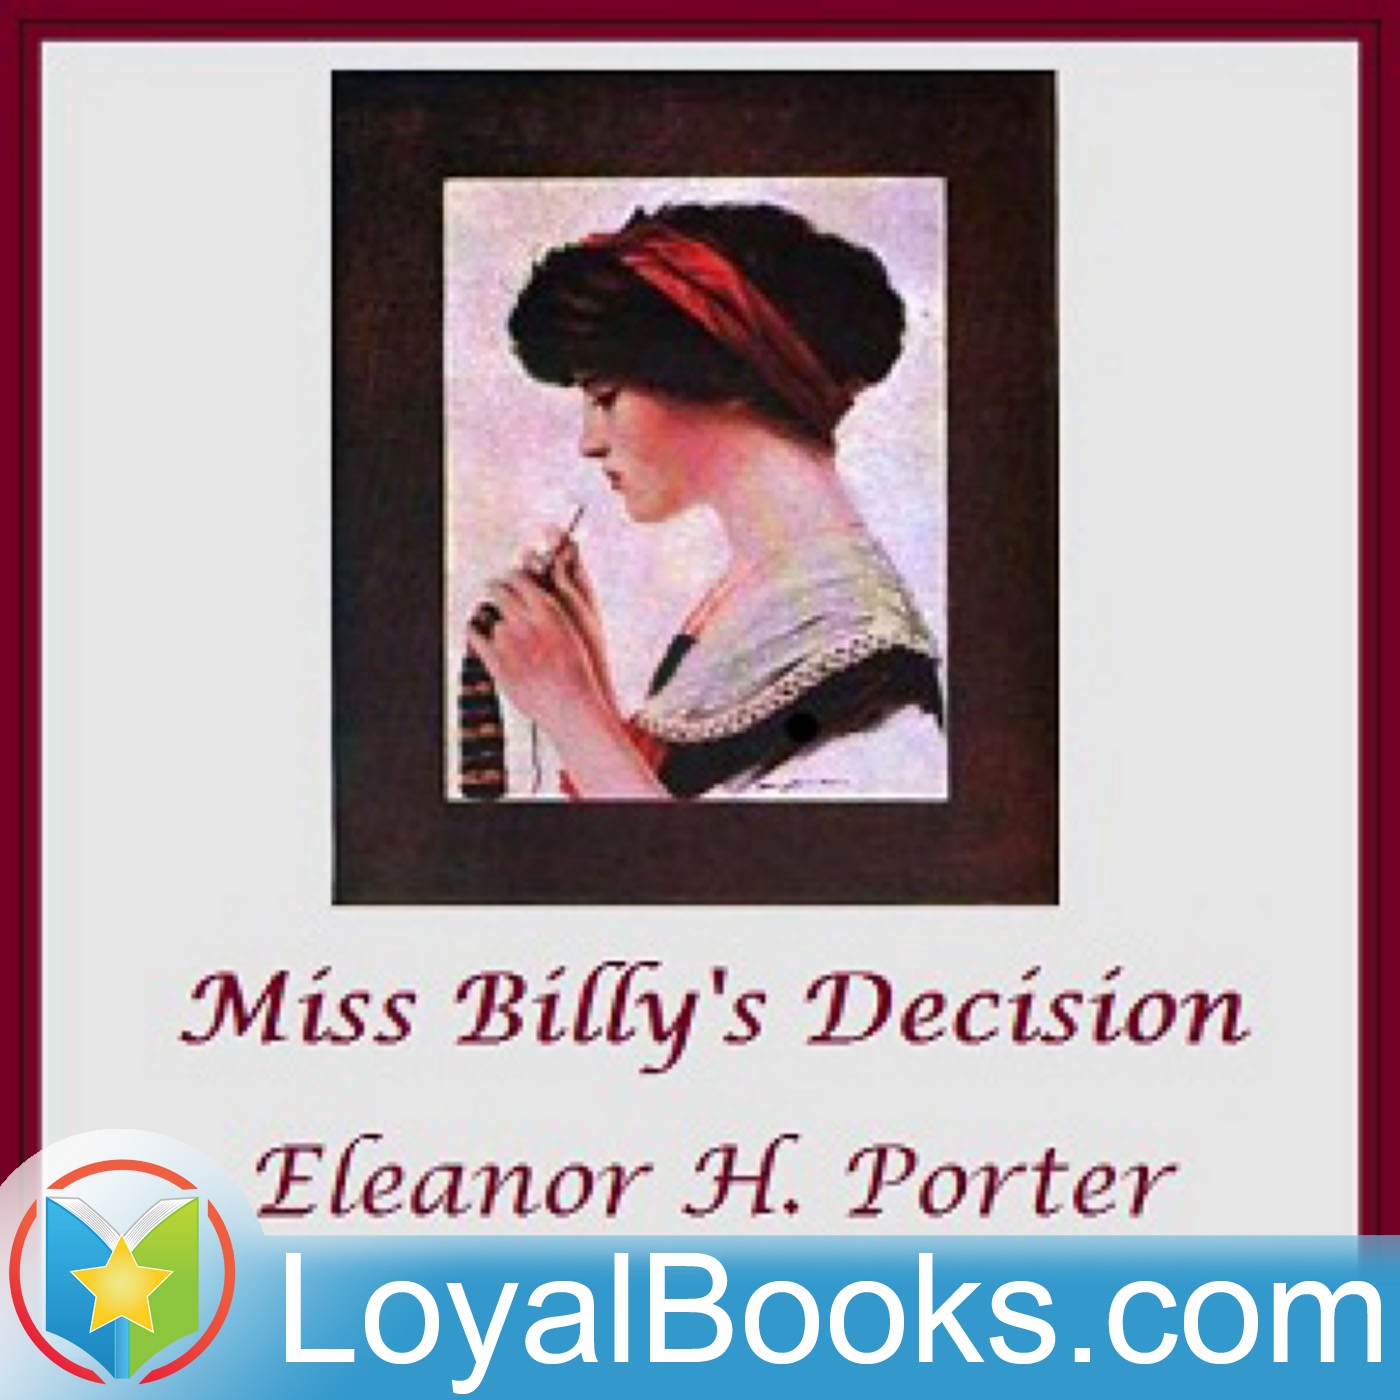 Miss Billy's Decision by Eleanor H. Porter